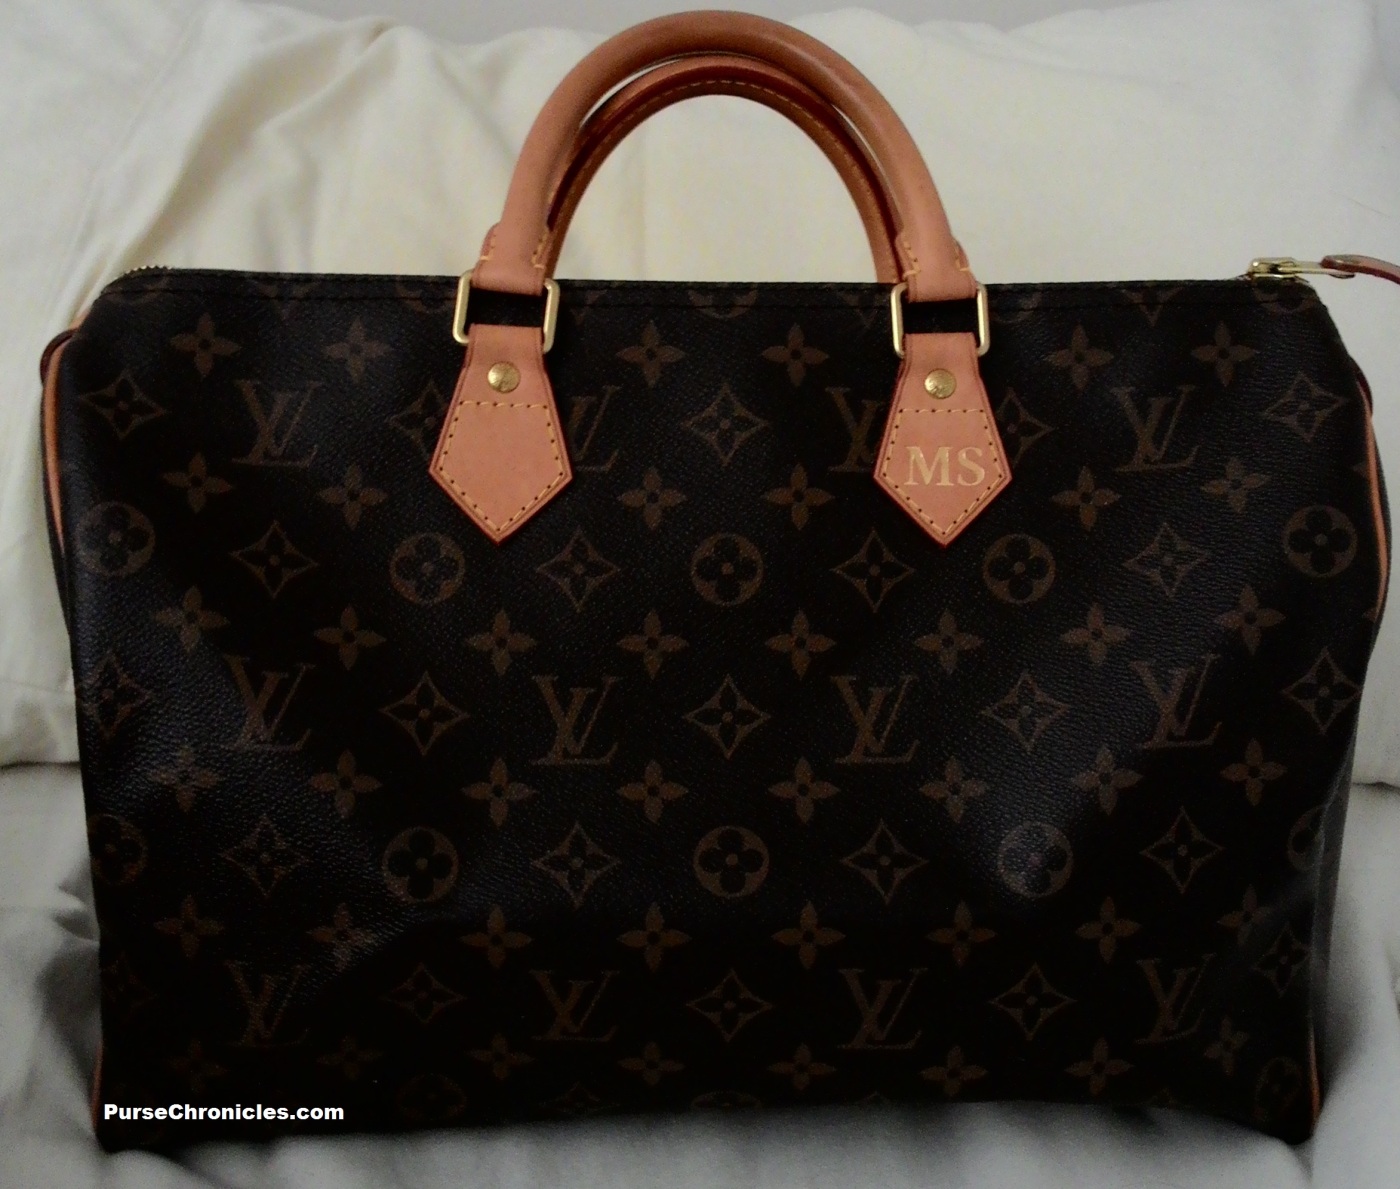 35 Things That Shouldn't Be Louis Vuitton-Monogrammed